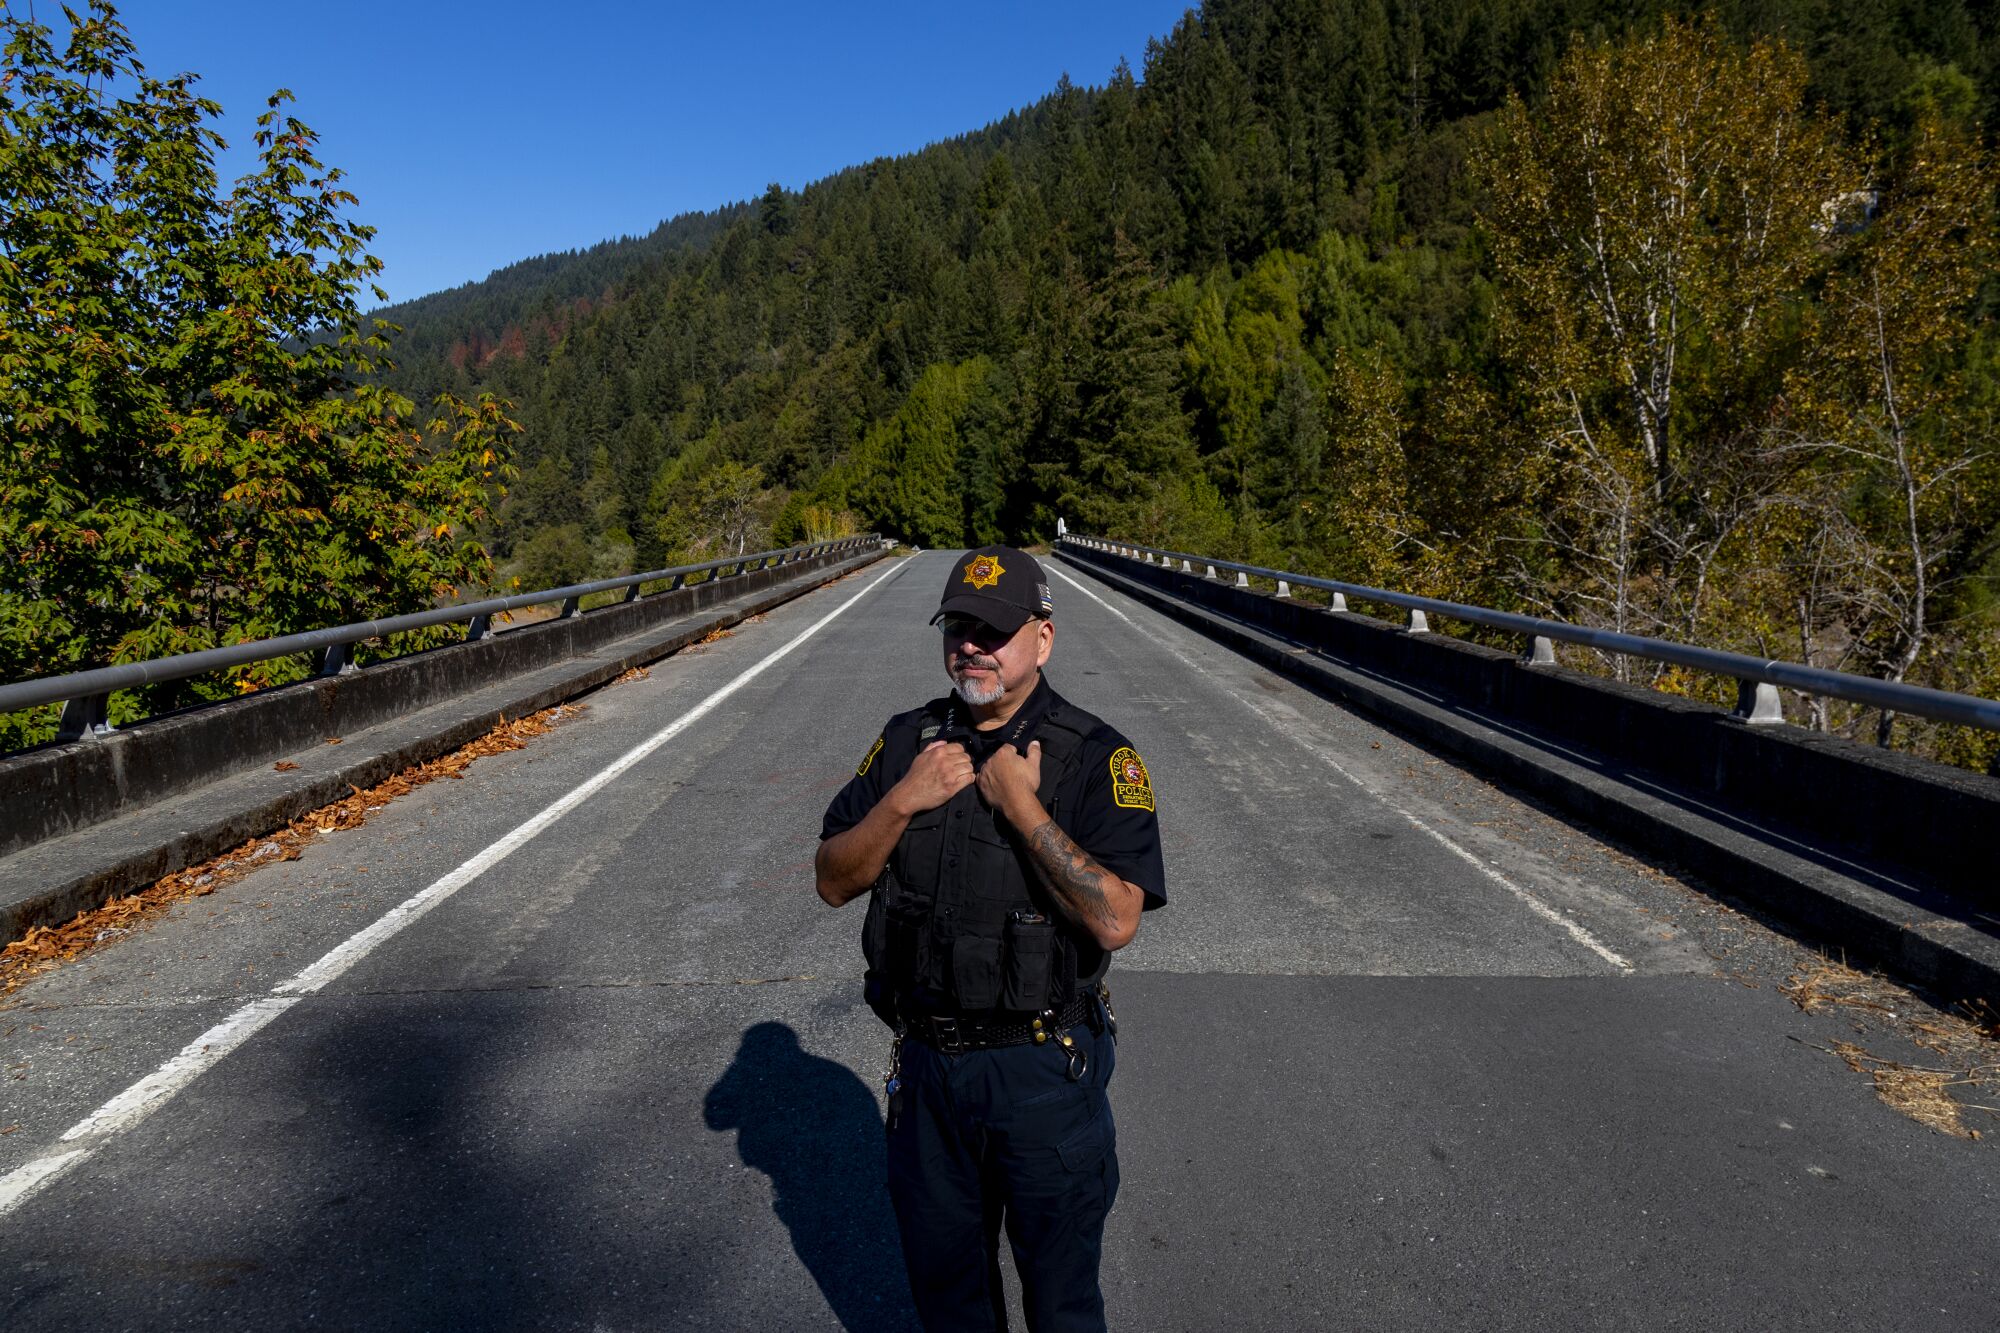 Yurok Tribal Police Chief Greg O'Rourke stands on a highway bridge surrounded by mostly pine forest